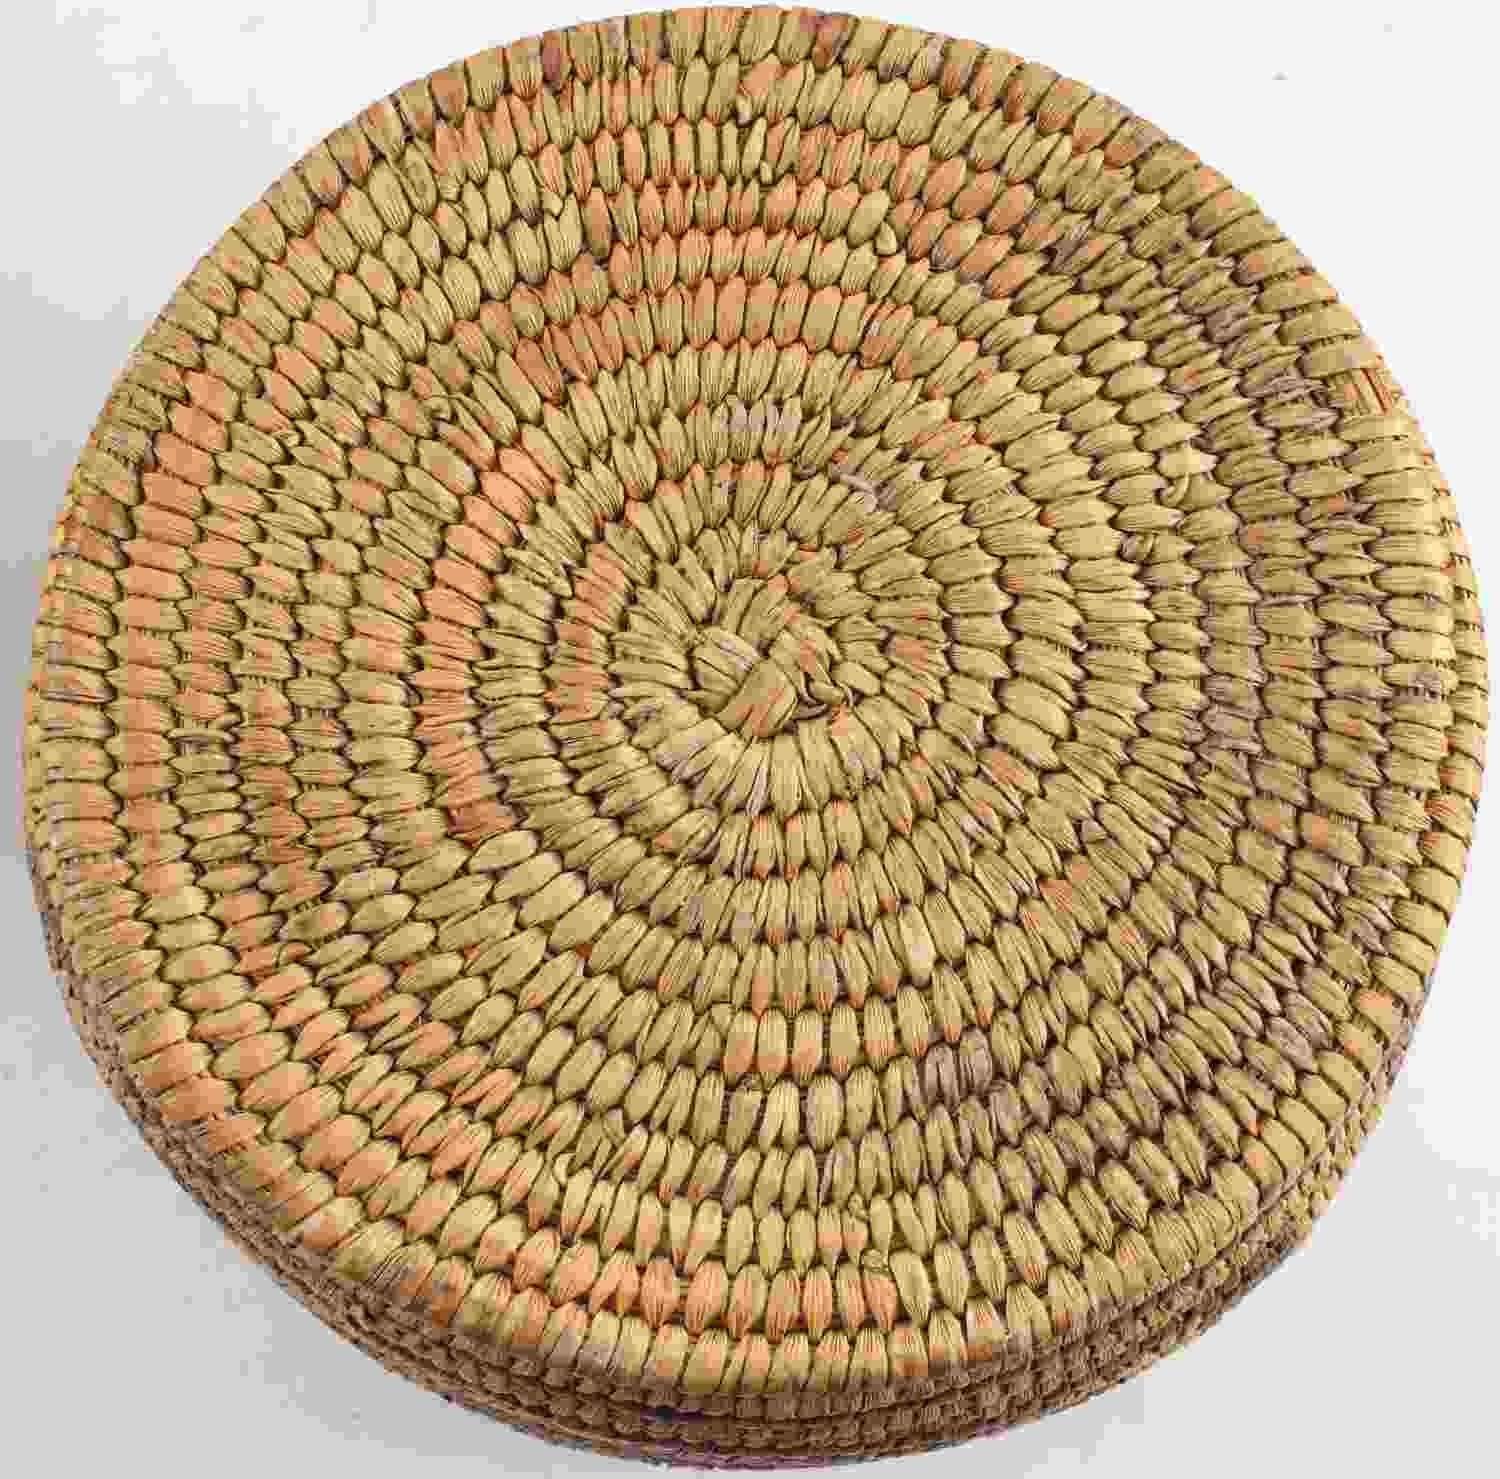 2 NATIVE AMERICAN INDIAN TRIPLE COIL WOVEN BASKETS